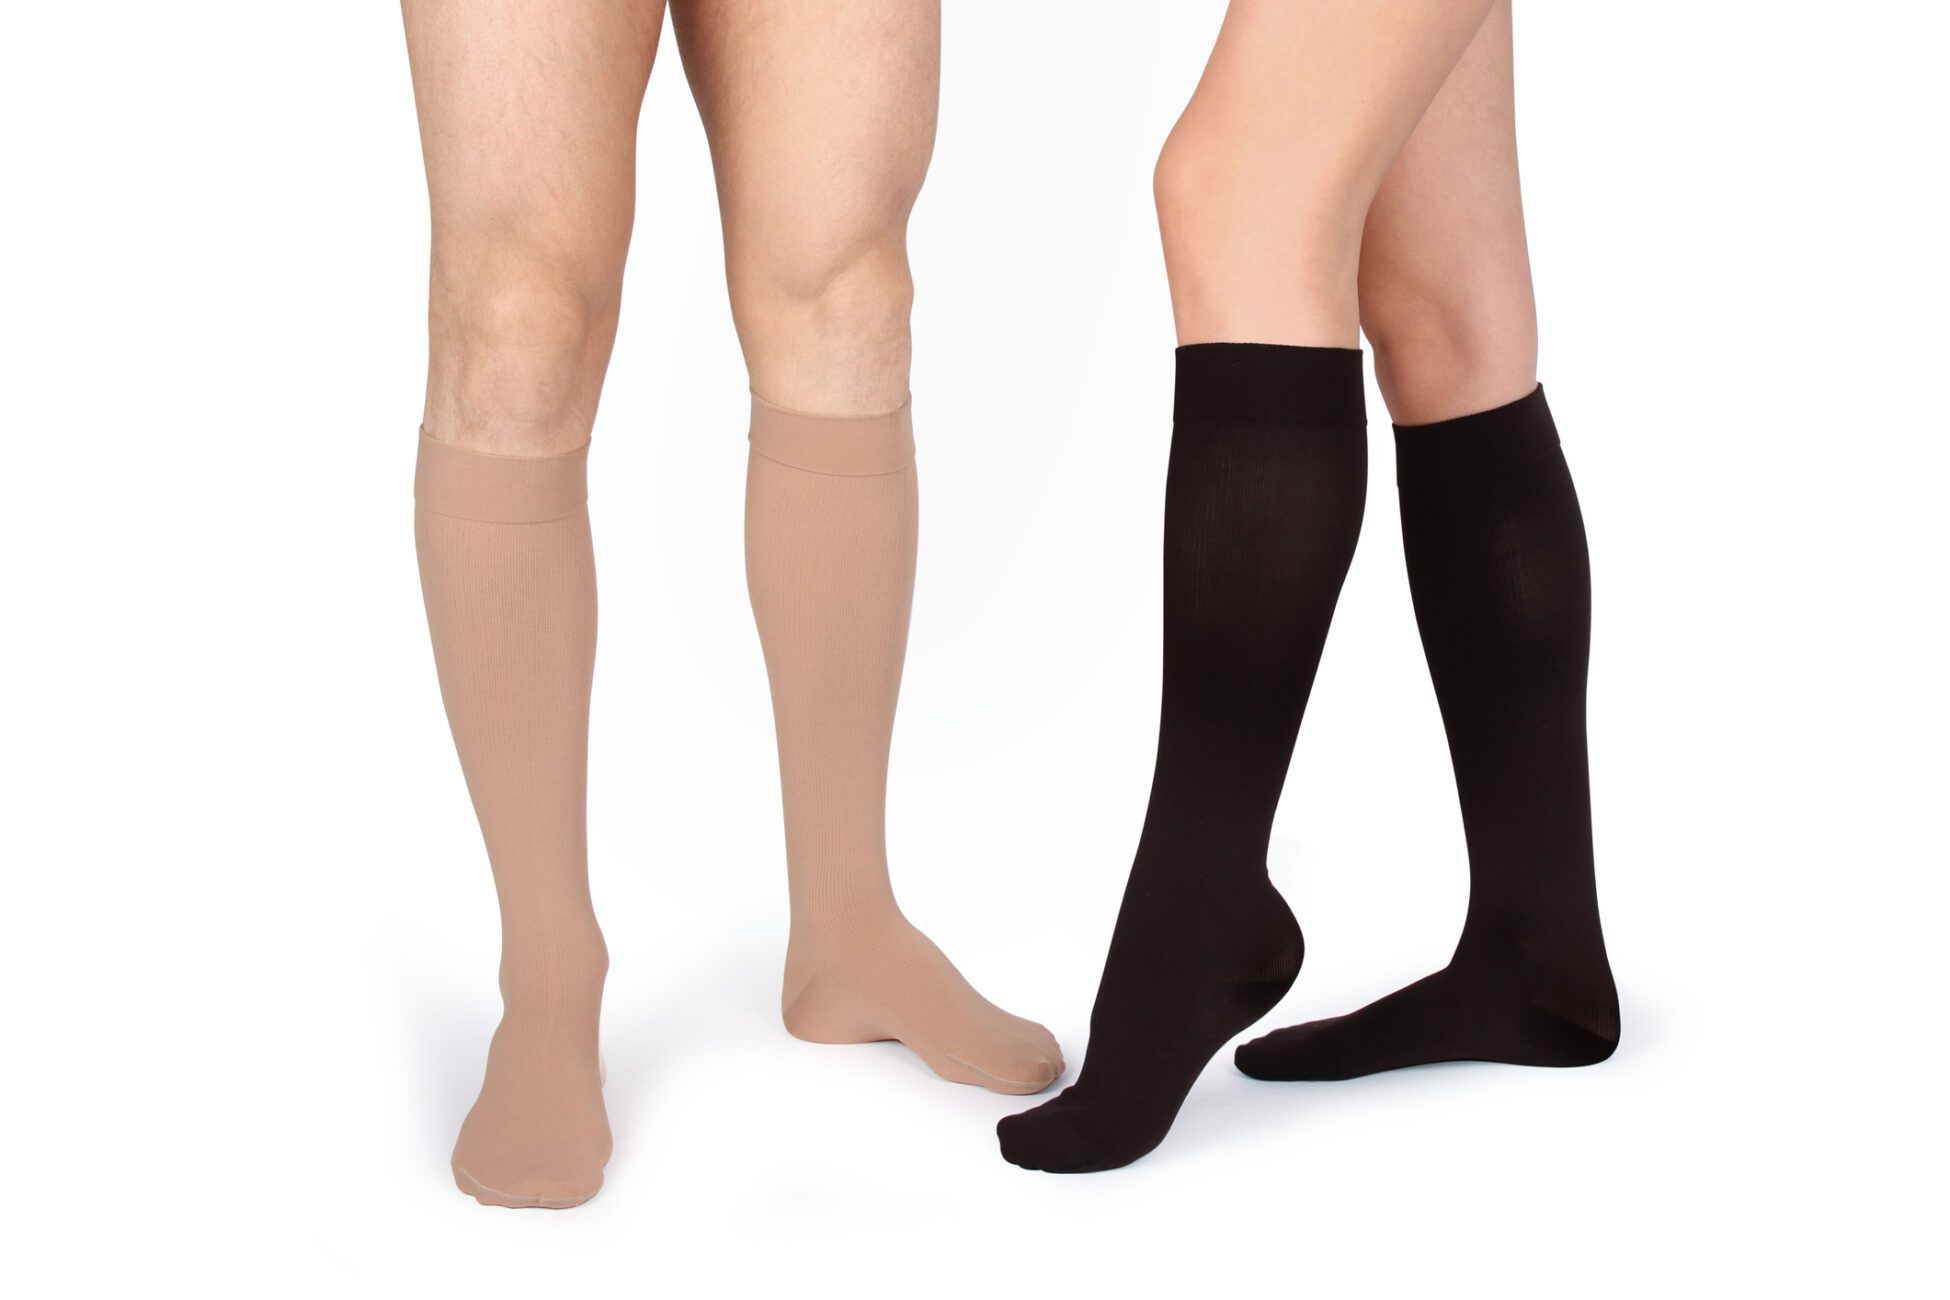 The Different Types of Compression Stockings and How to Wear Them